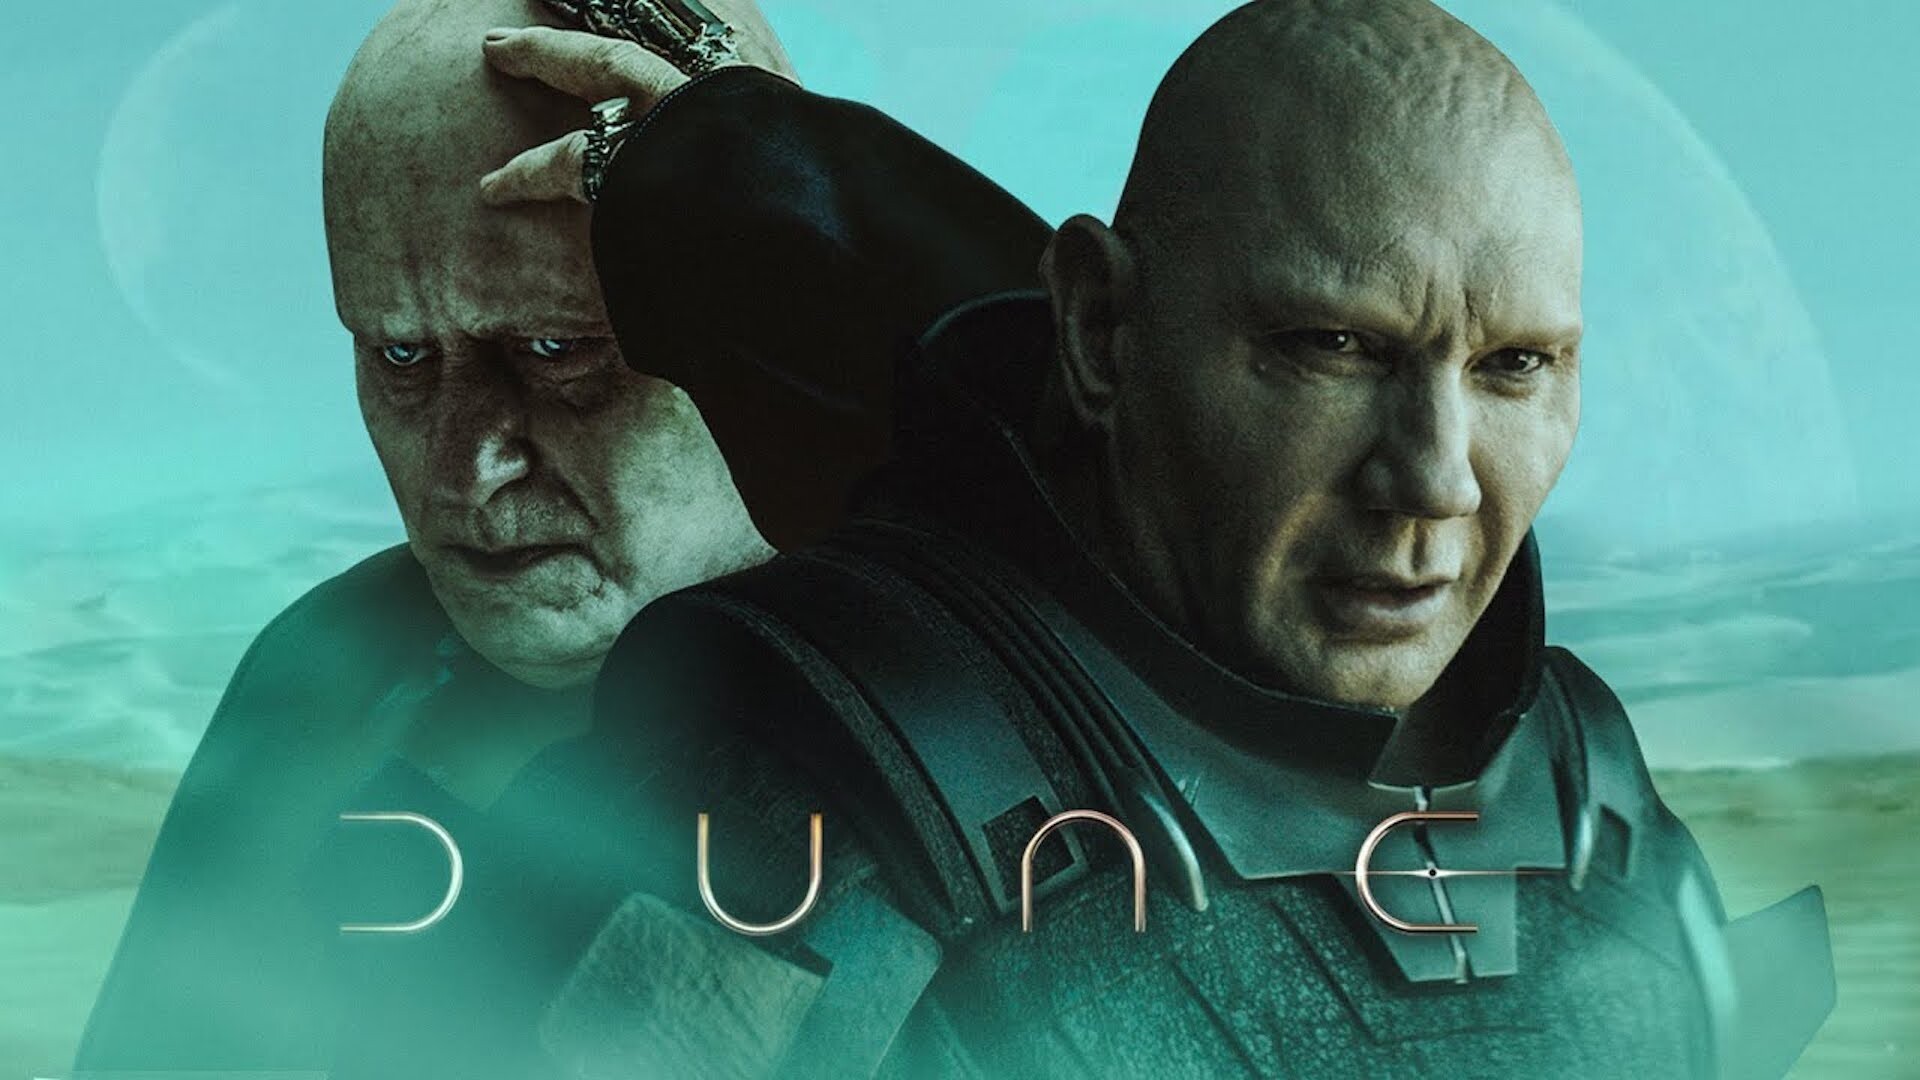 Dave Bautista in Dune movie, Futuristic society, Political intrigue, Ancient prophecy, 1920x1080 Full HD Desktop